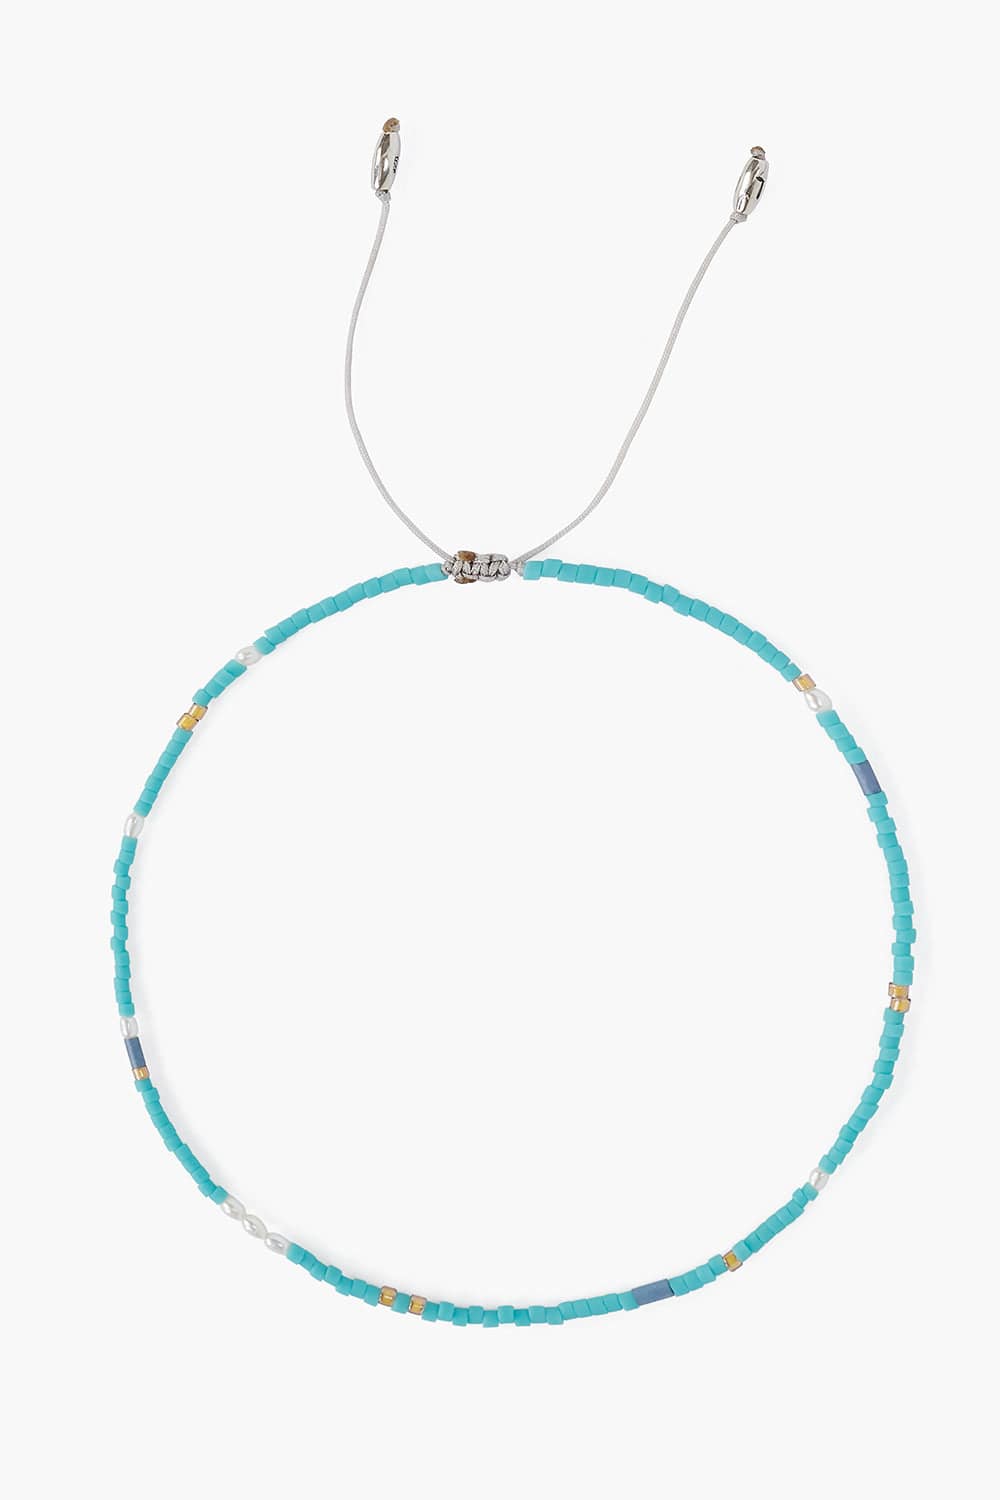 ANK Seed Bead & Pearl Pull Adjustable Anklet - Turquoise